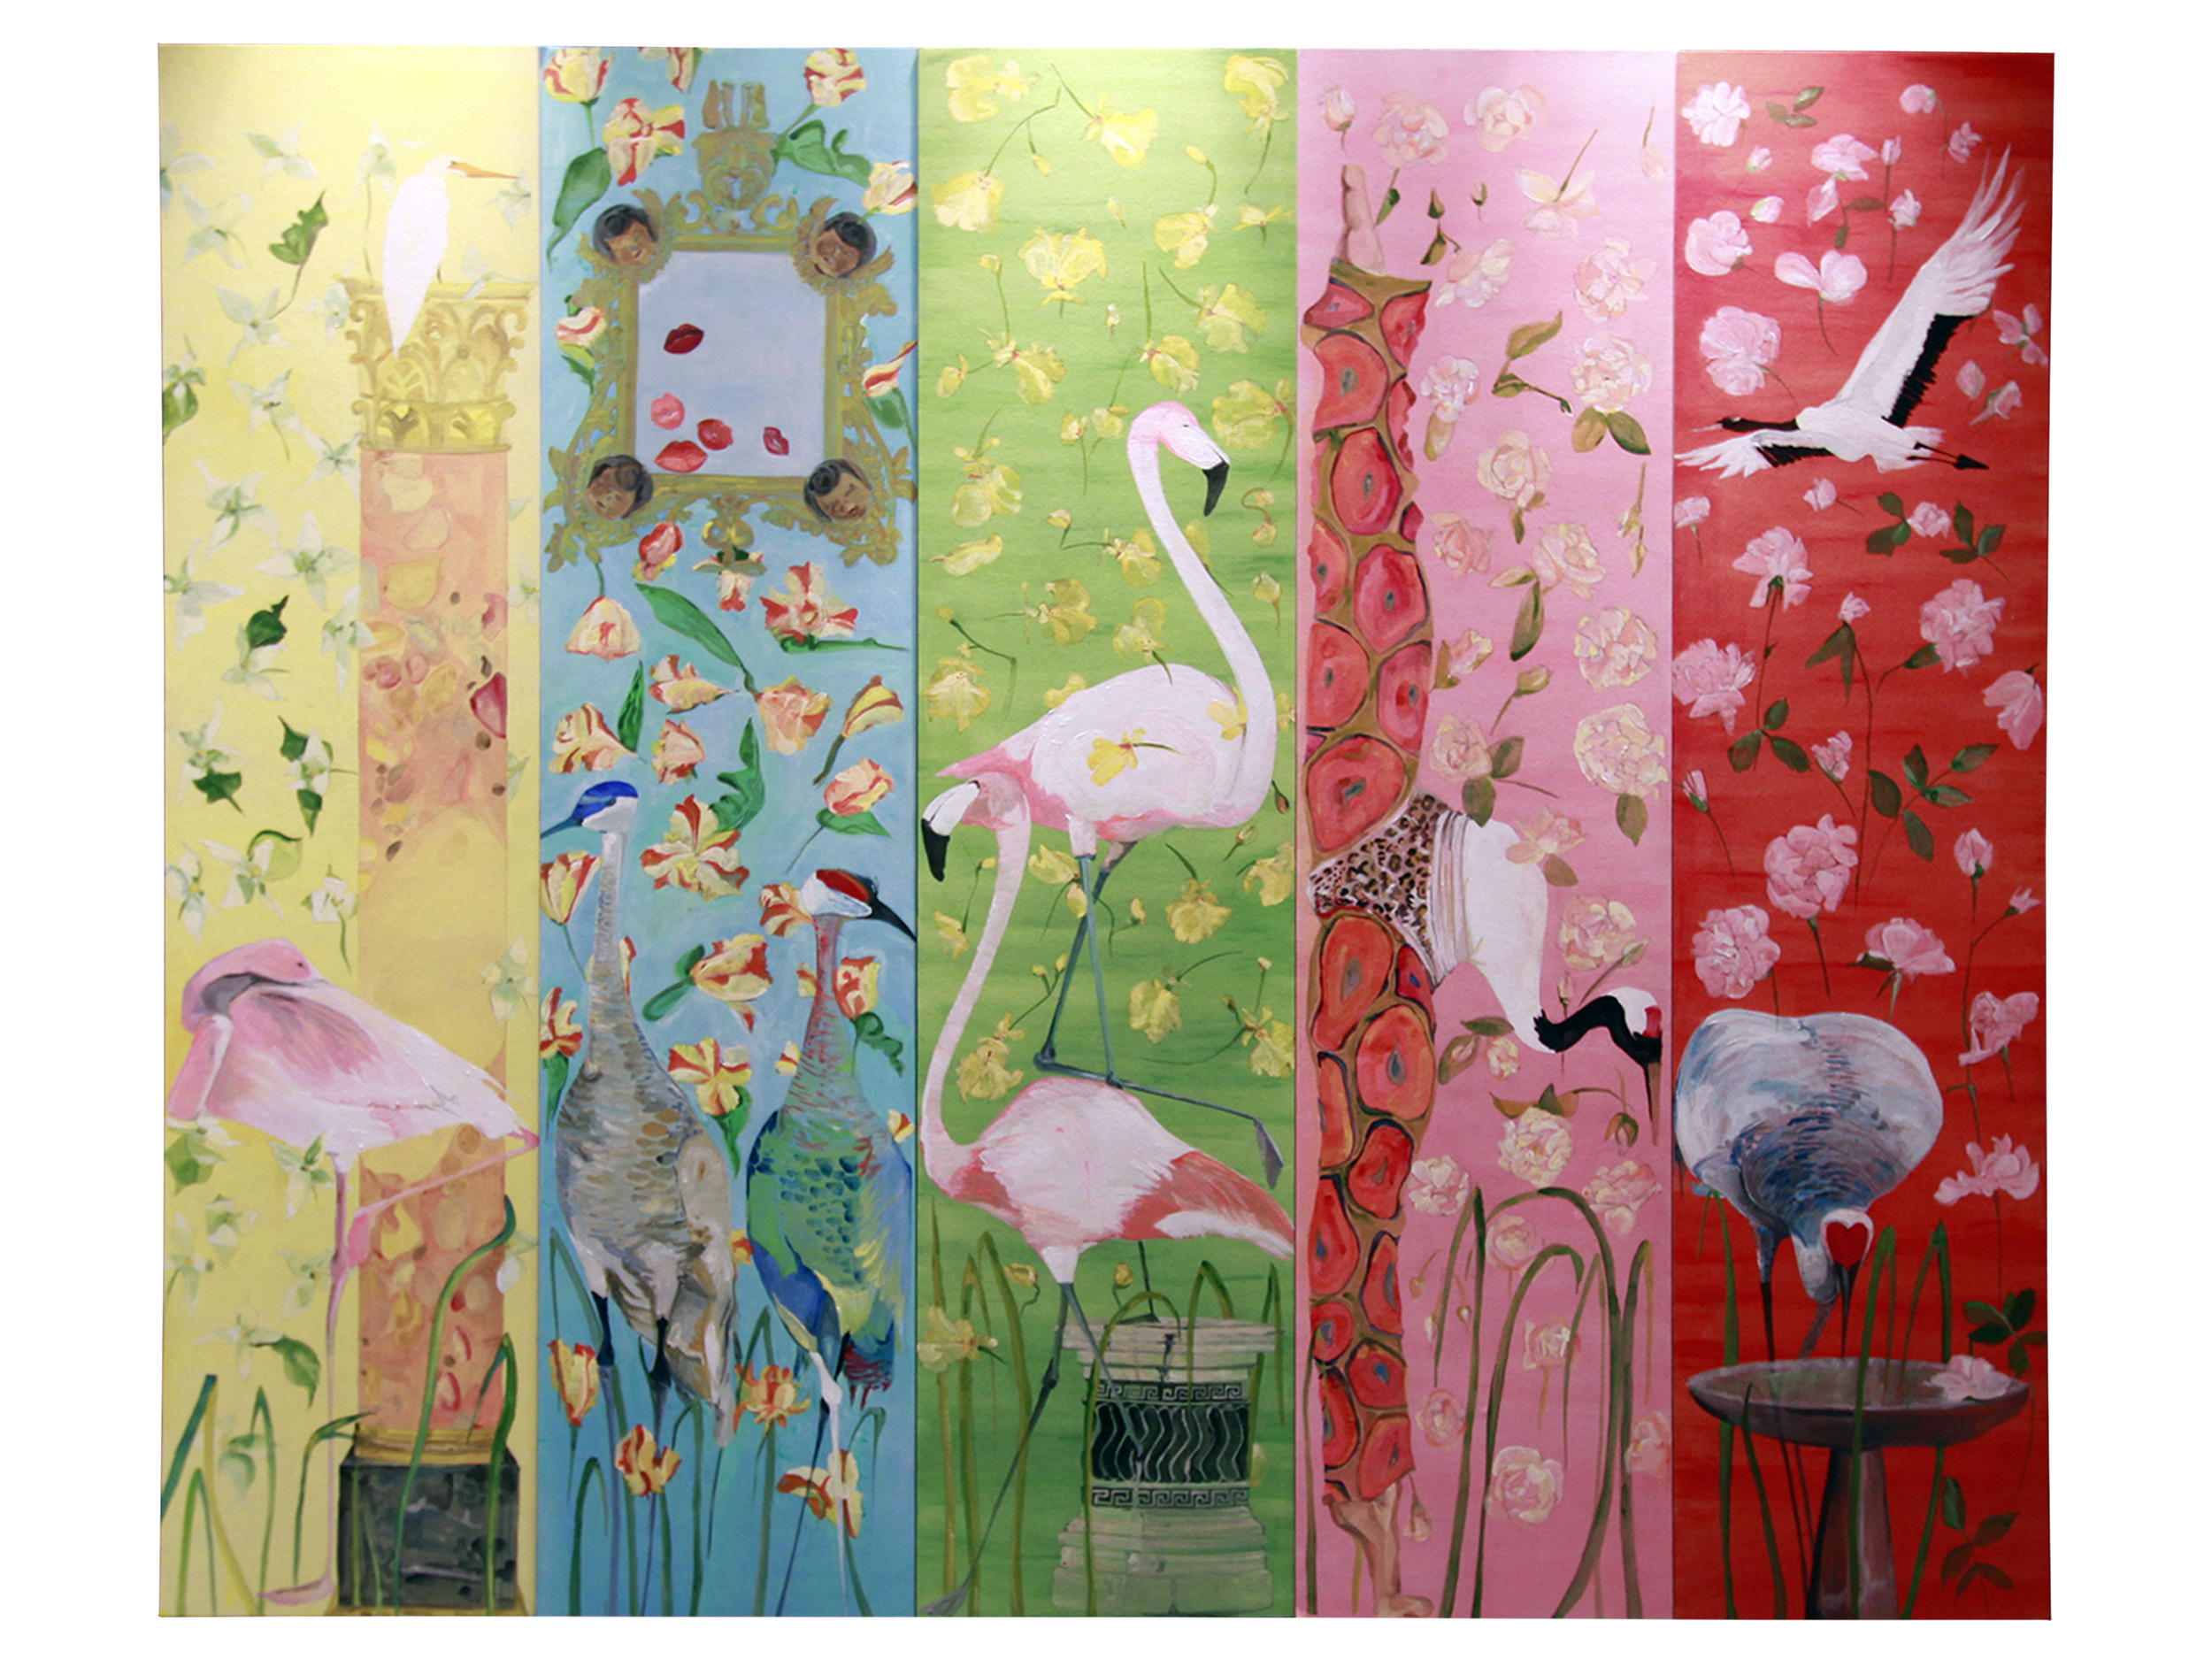  of Earthly Delights 5 panel hand painted wallpaper mural Paris 2015 2500x1875